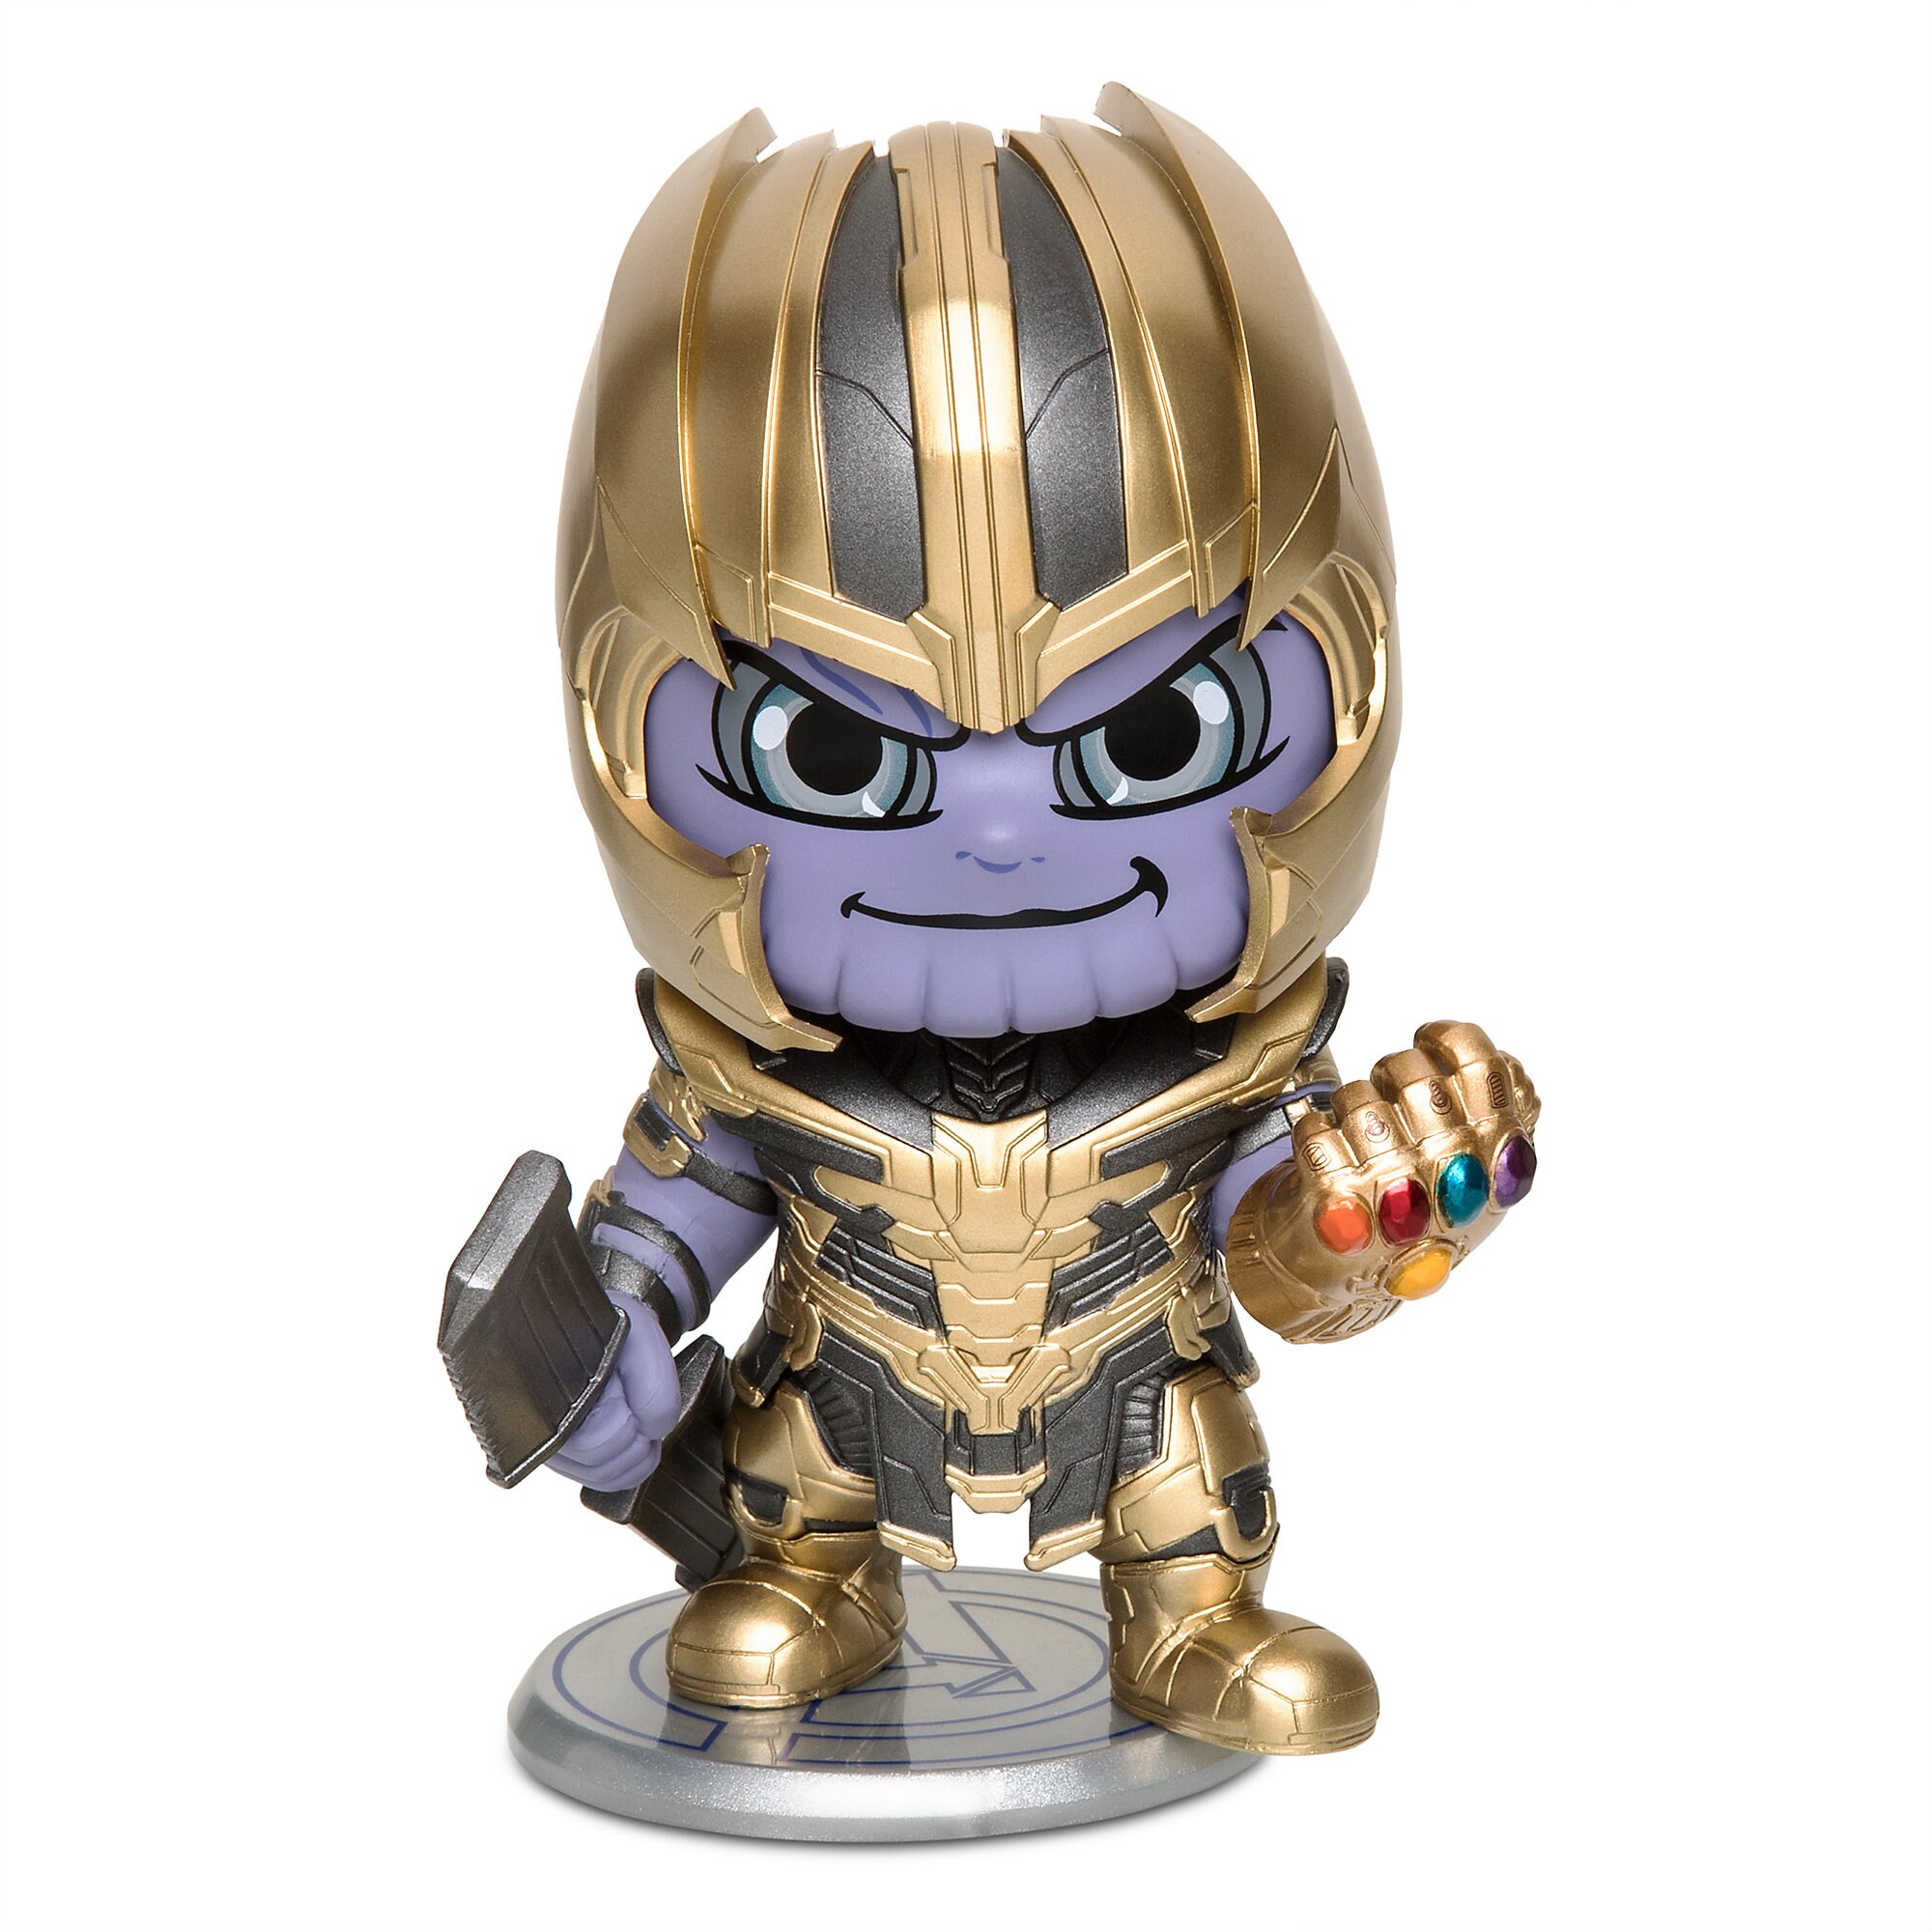 Thanos Cosbaby Bobble-Head Figure by Hot Toys - Marvel's Avengers: Endgame